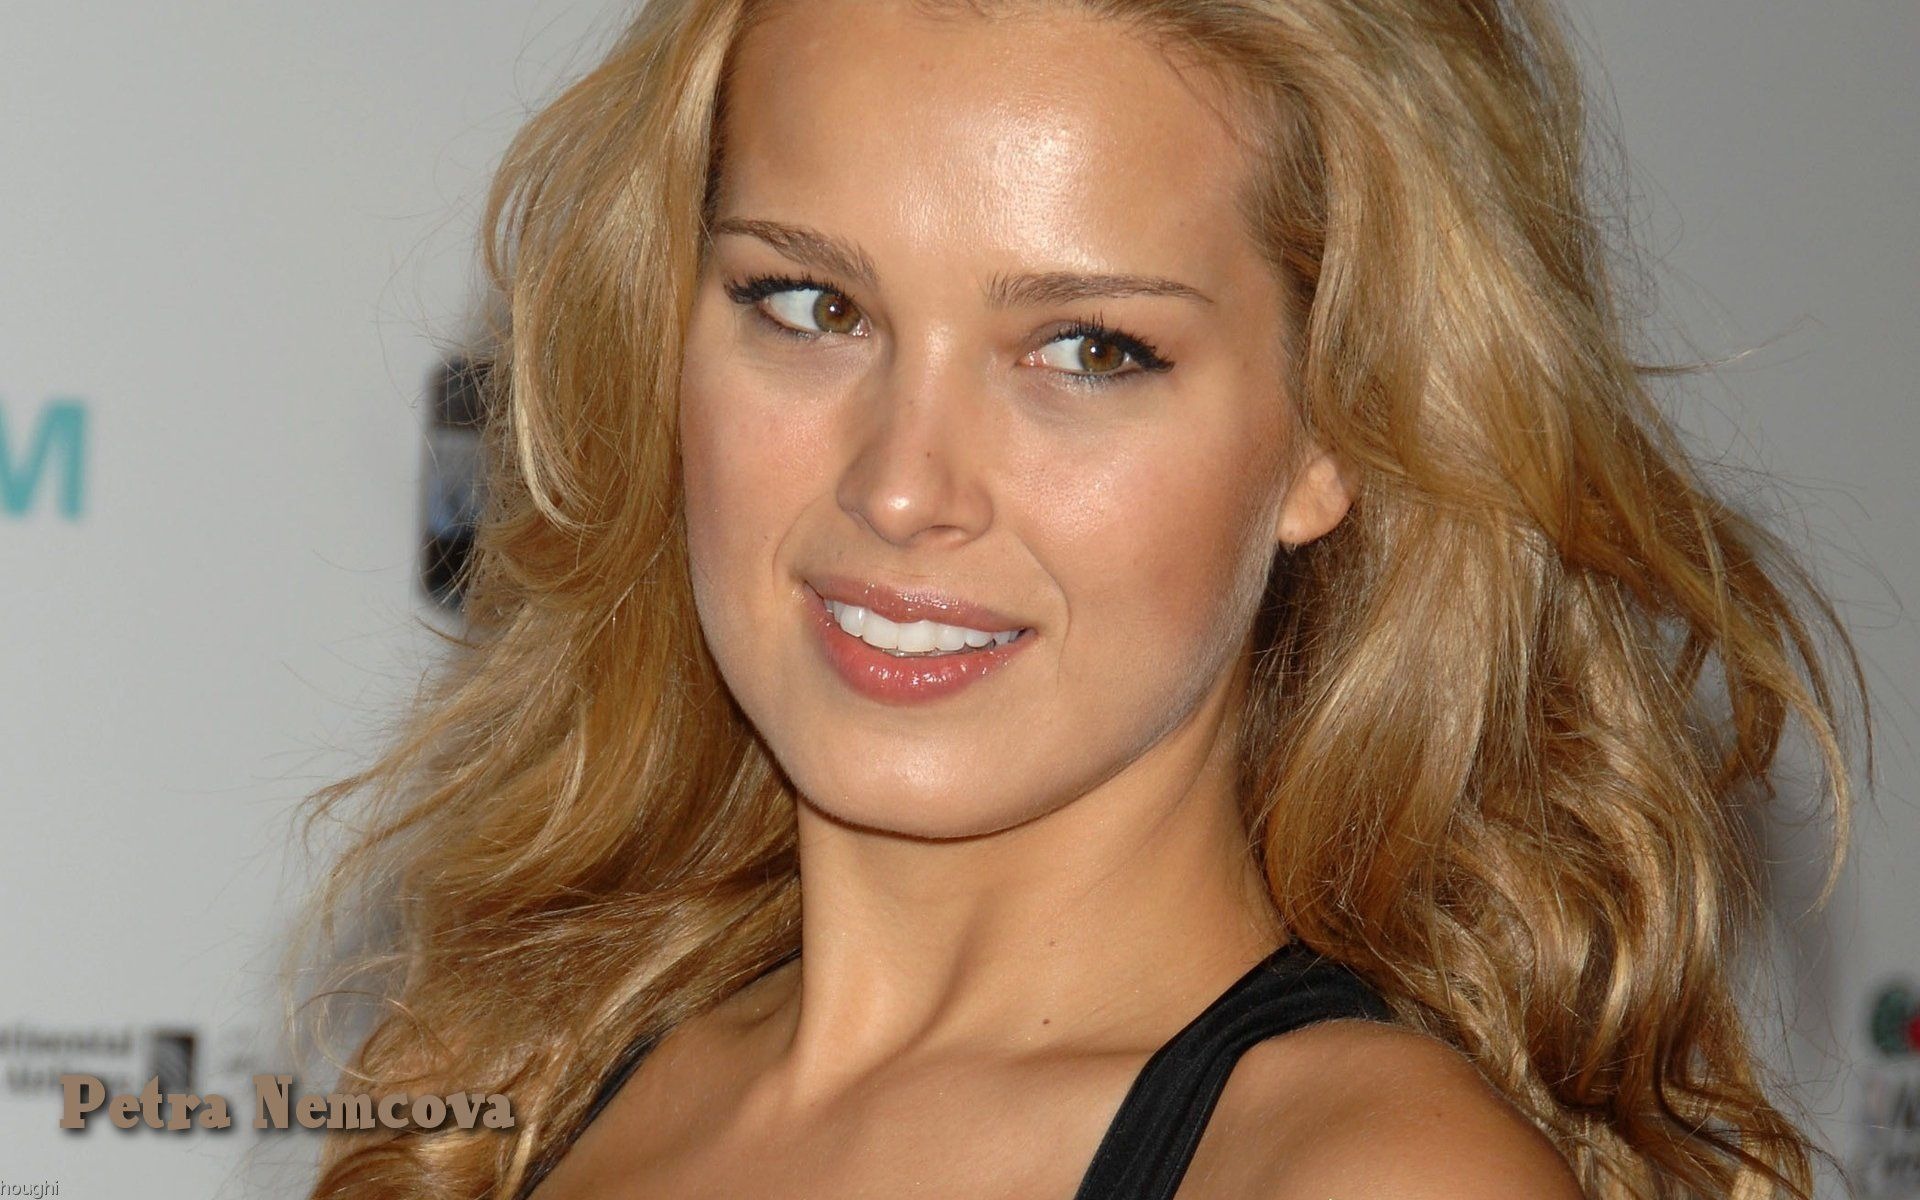 Petra Nemcova #034 - 1920x1200 Wallpapers Pictures Photos Images